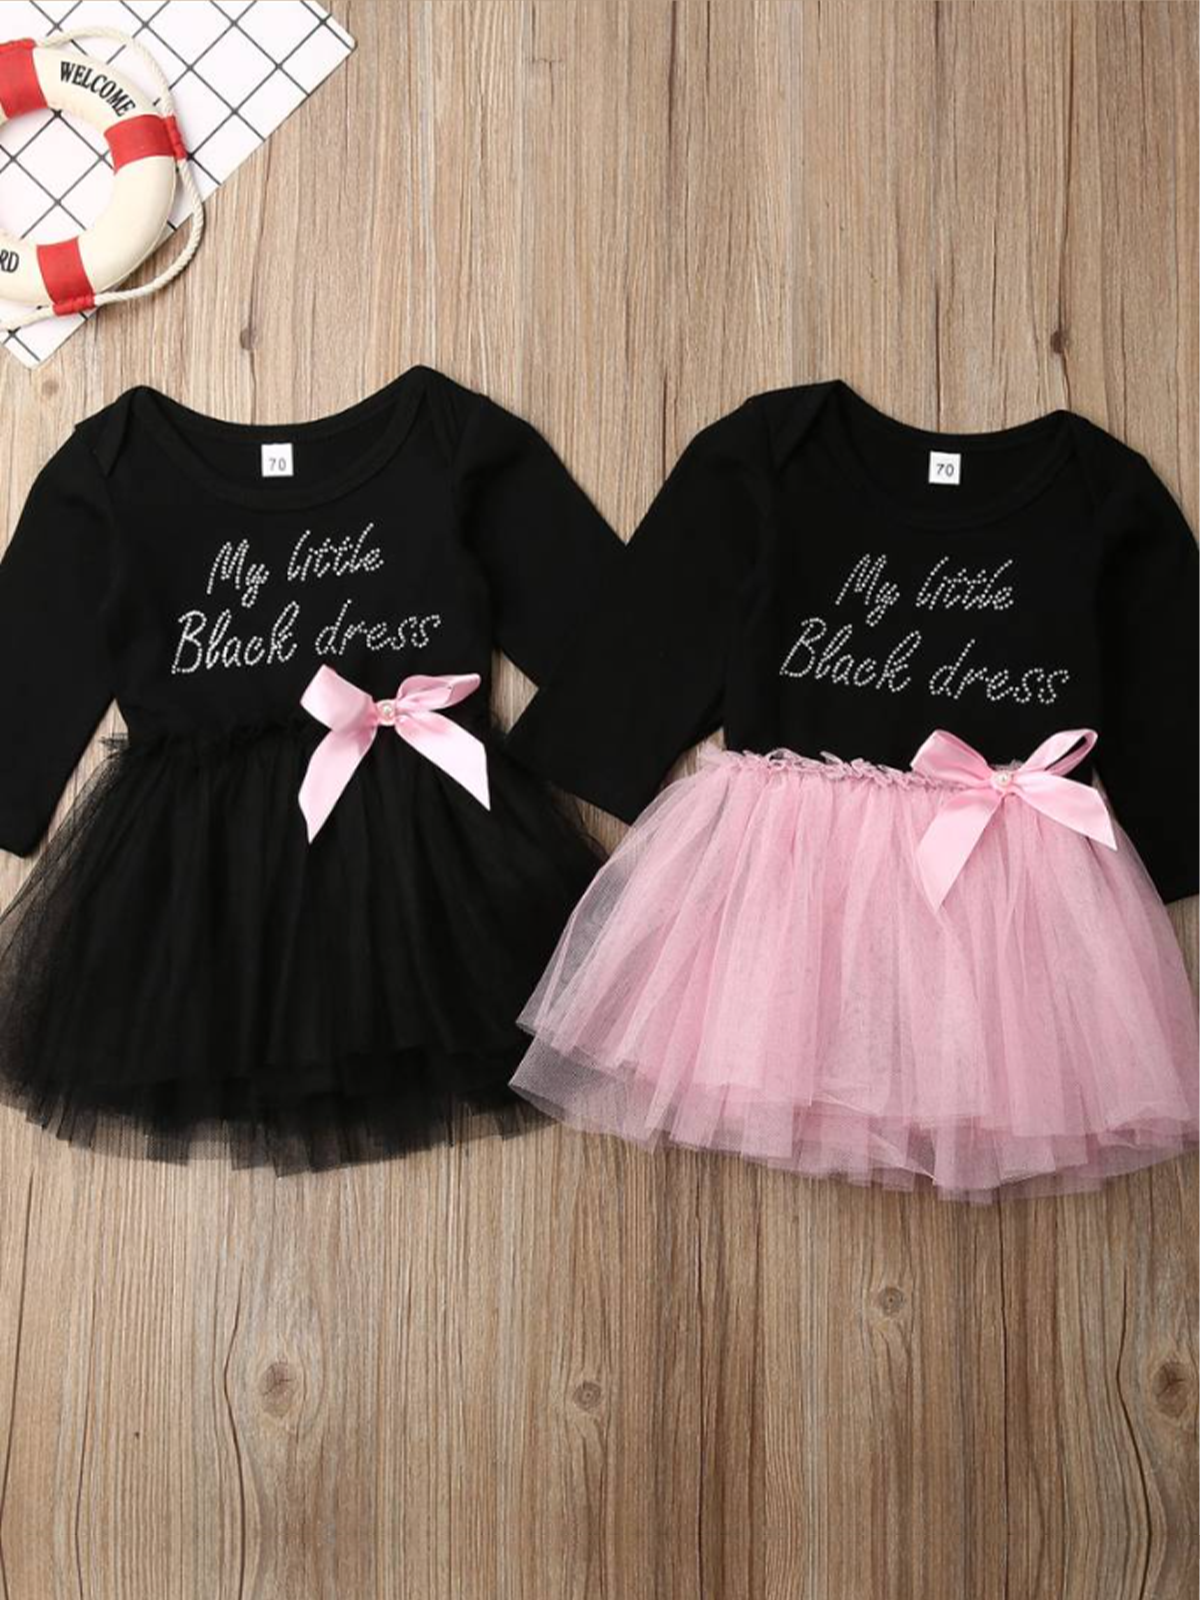 tutu dress has a long sleeved black bodice with "My Little Black Dress" in rhinestones and a tutu skirt